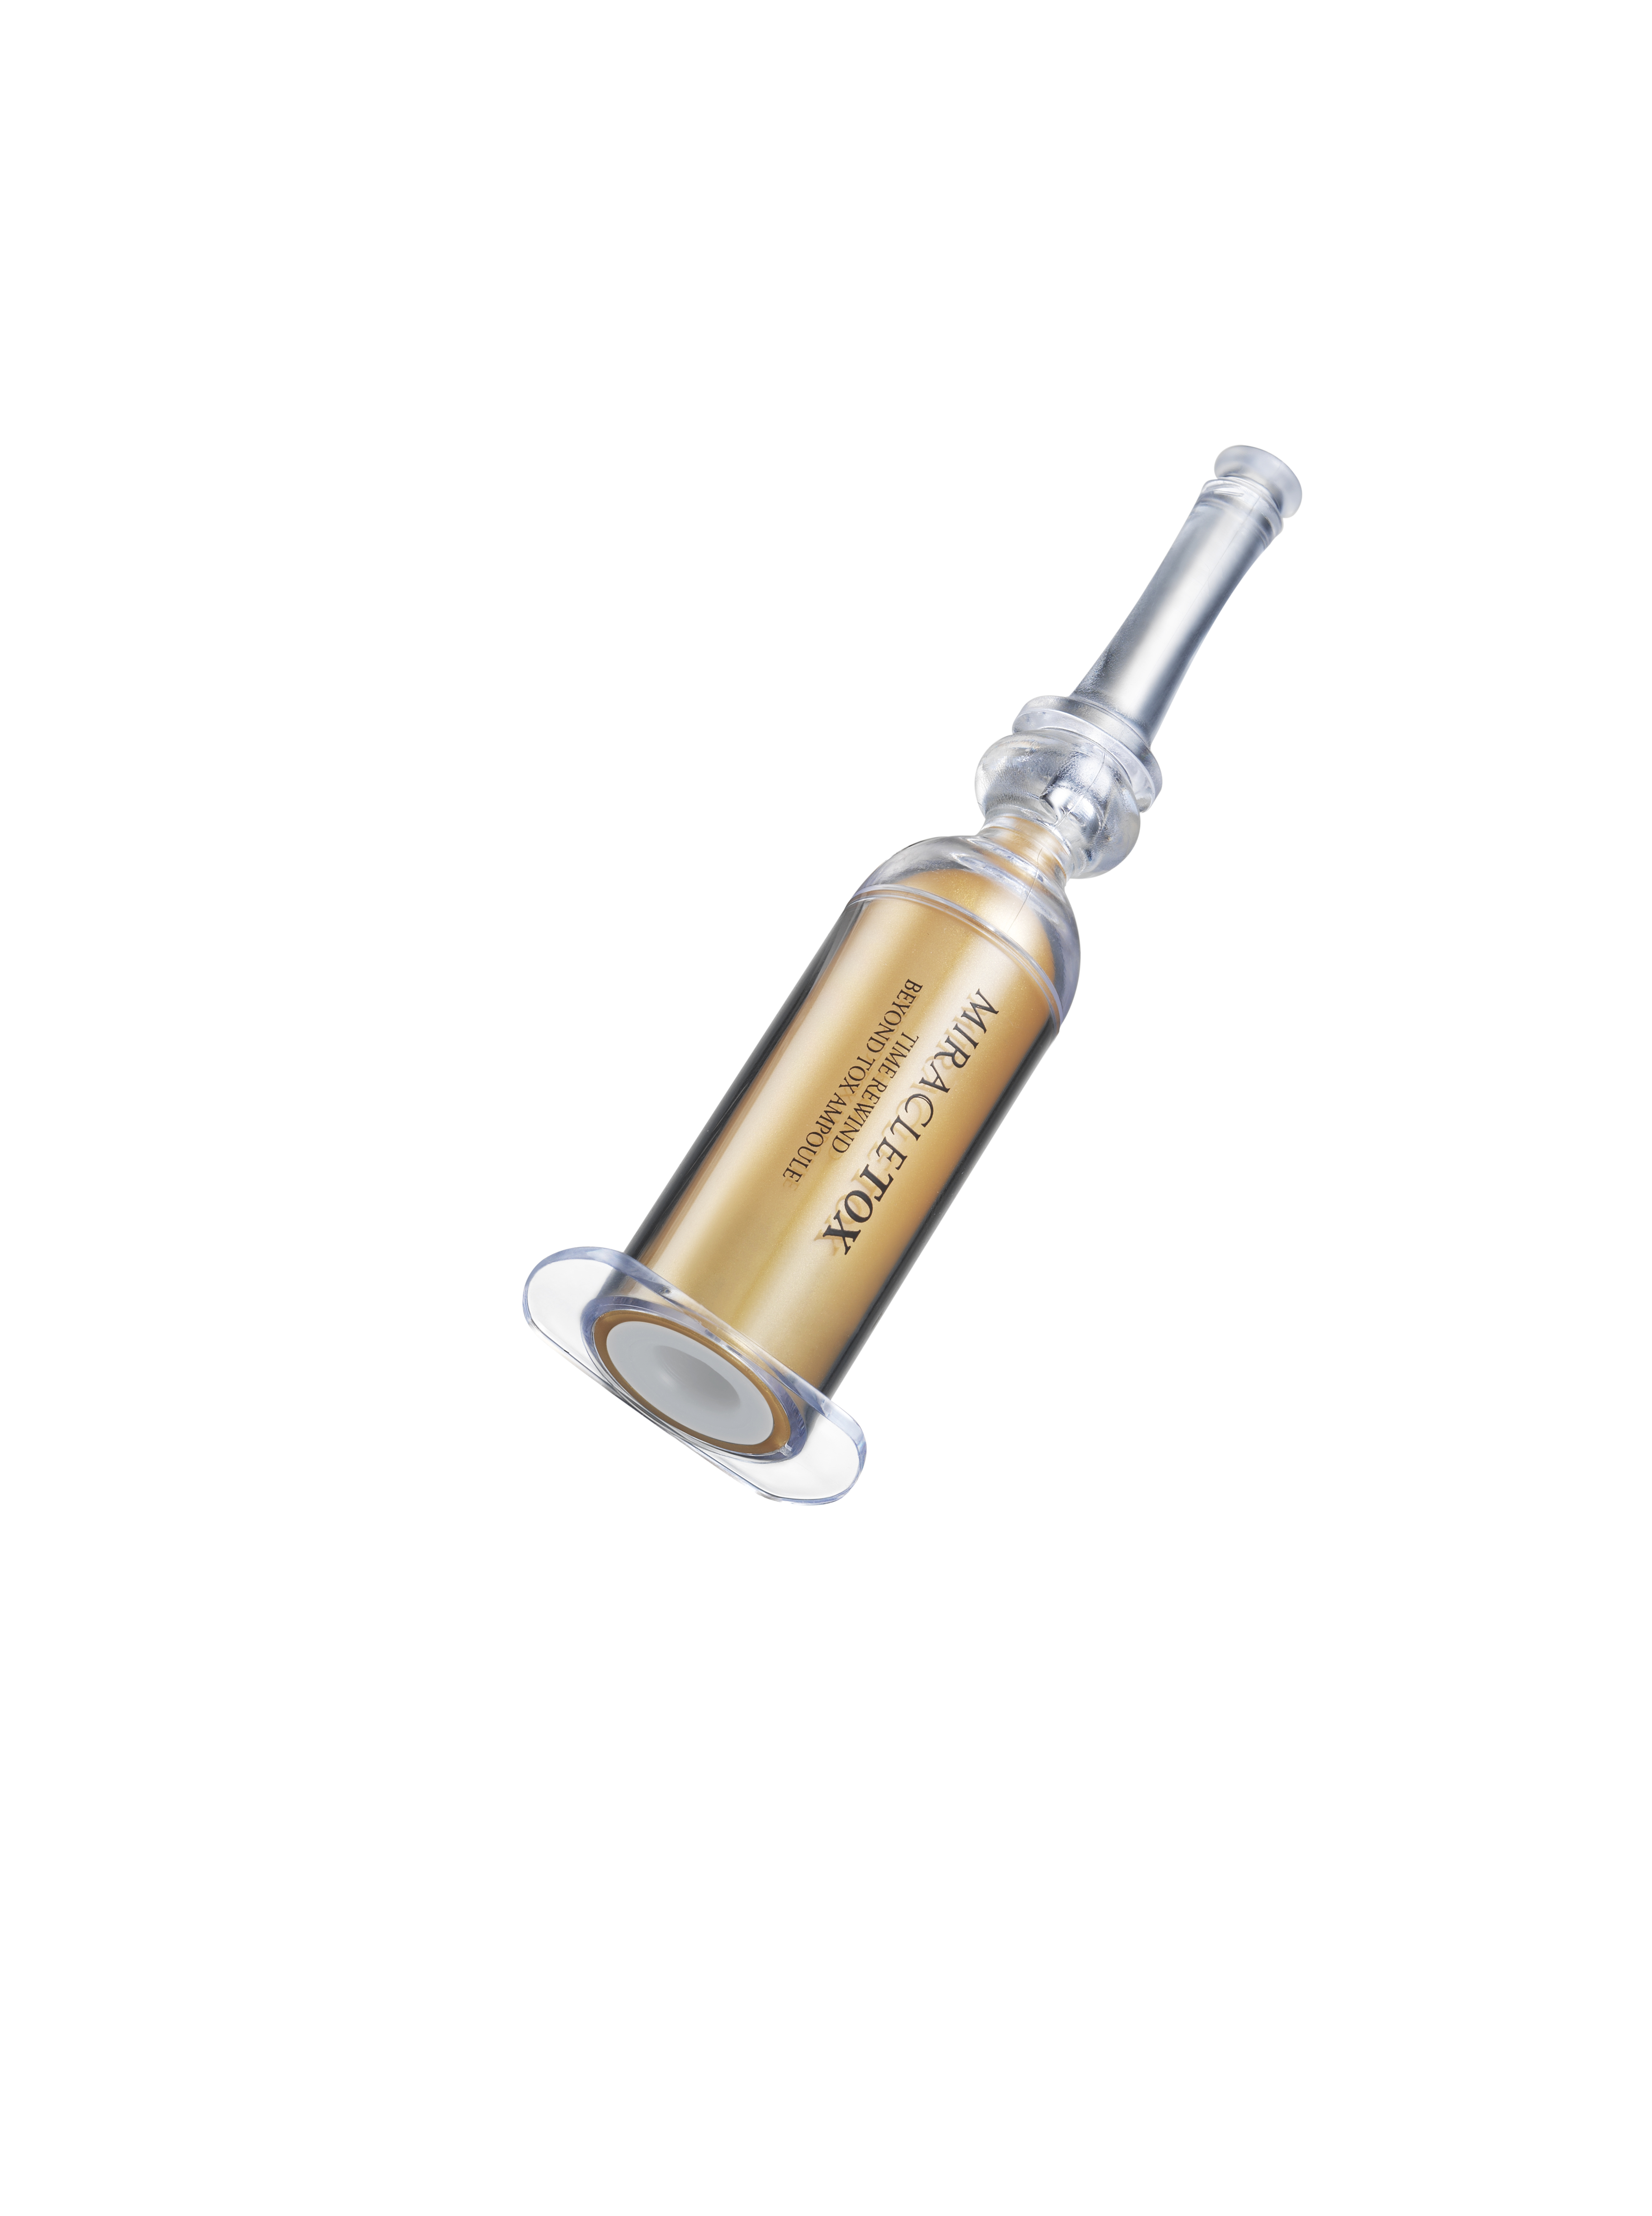 Time Rewind Beyond Tox  Ampoule